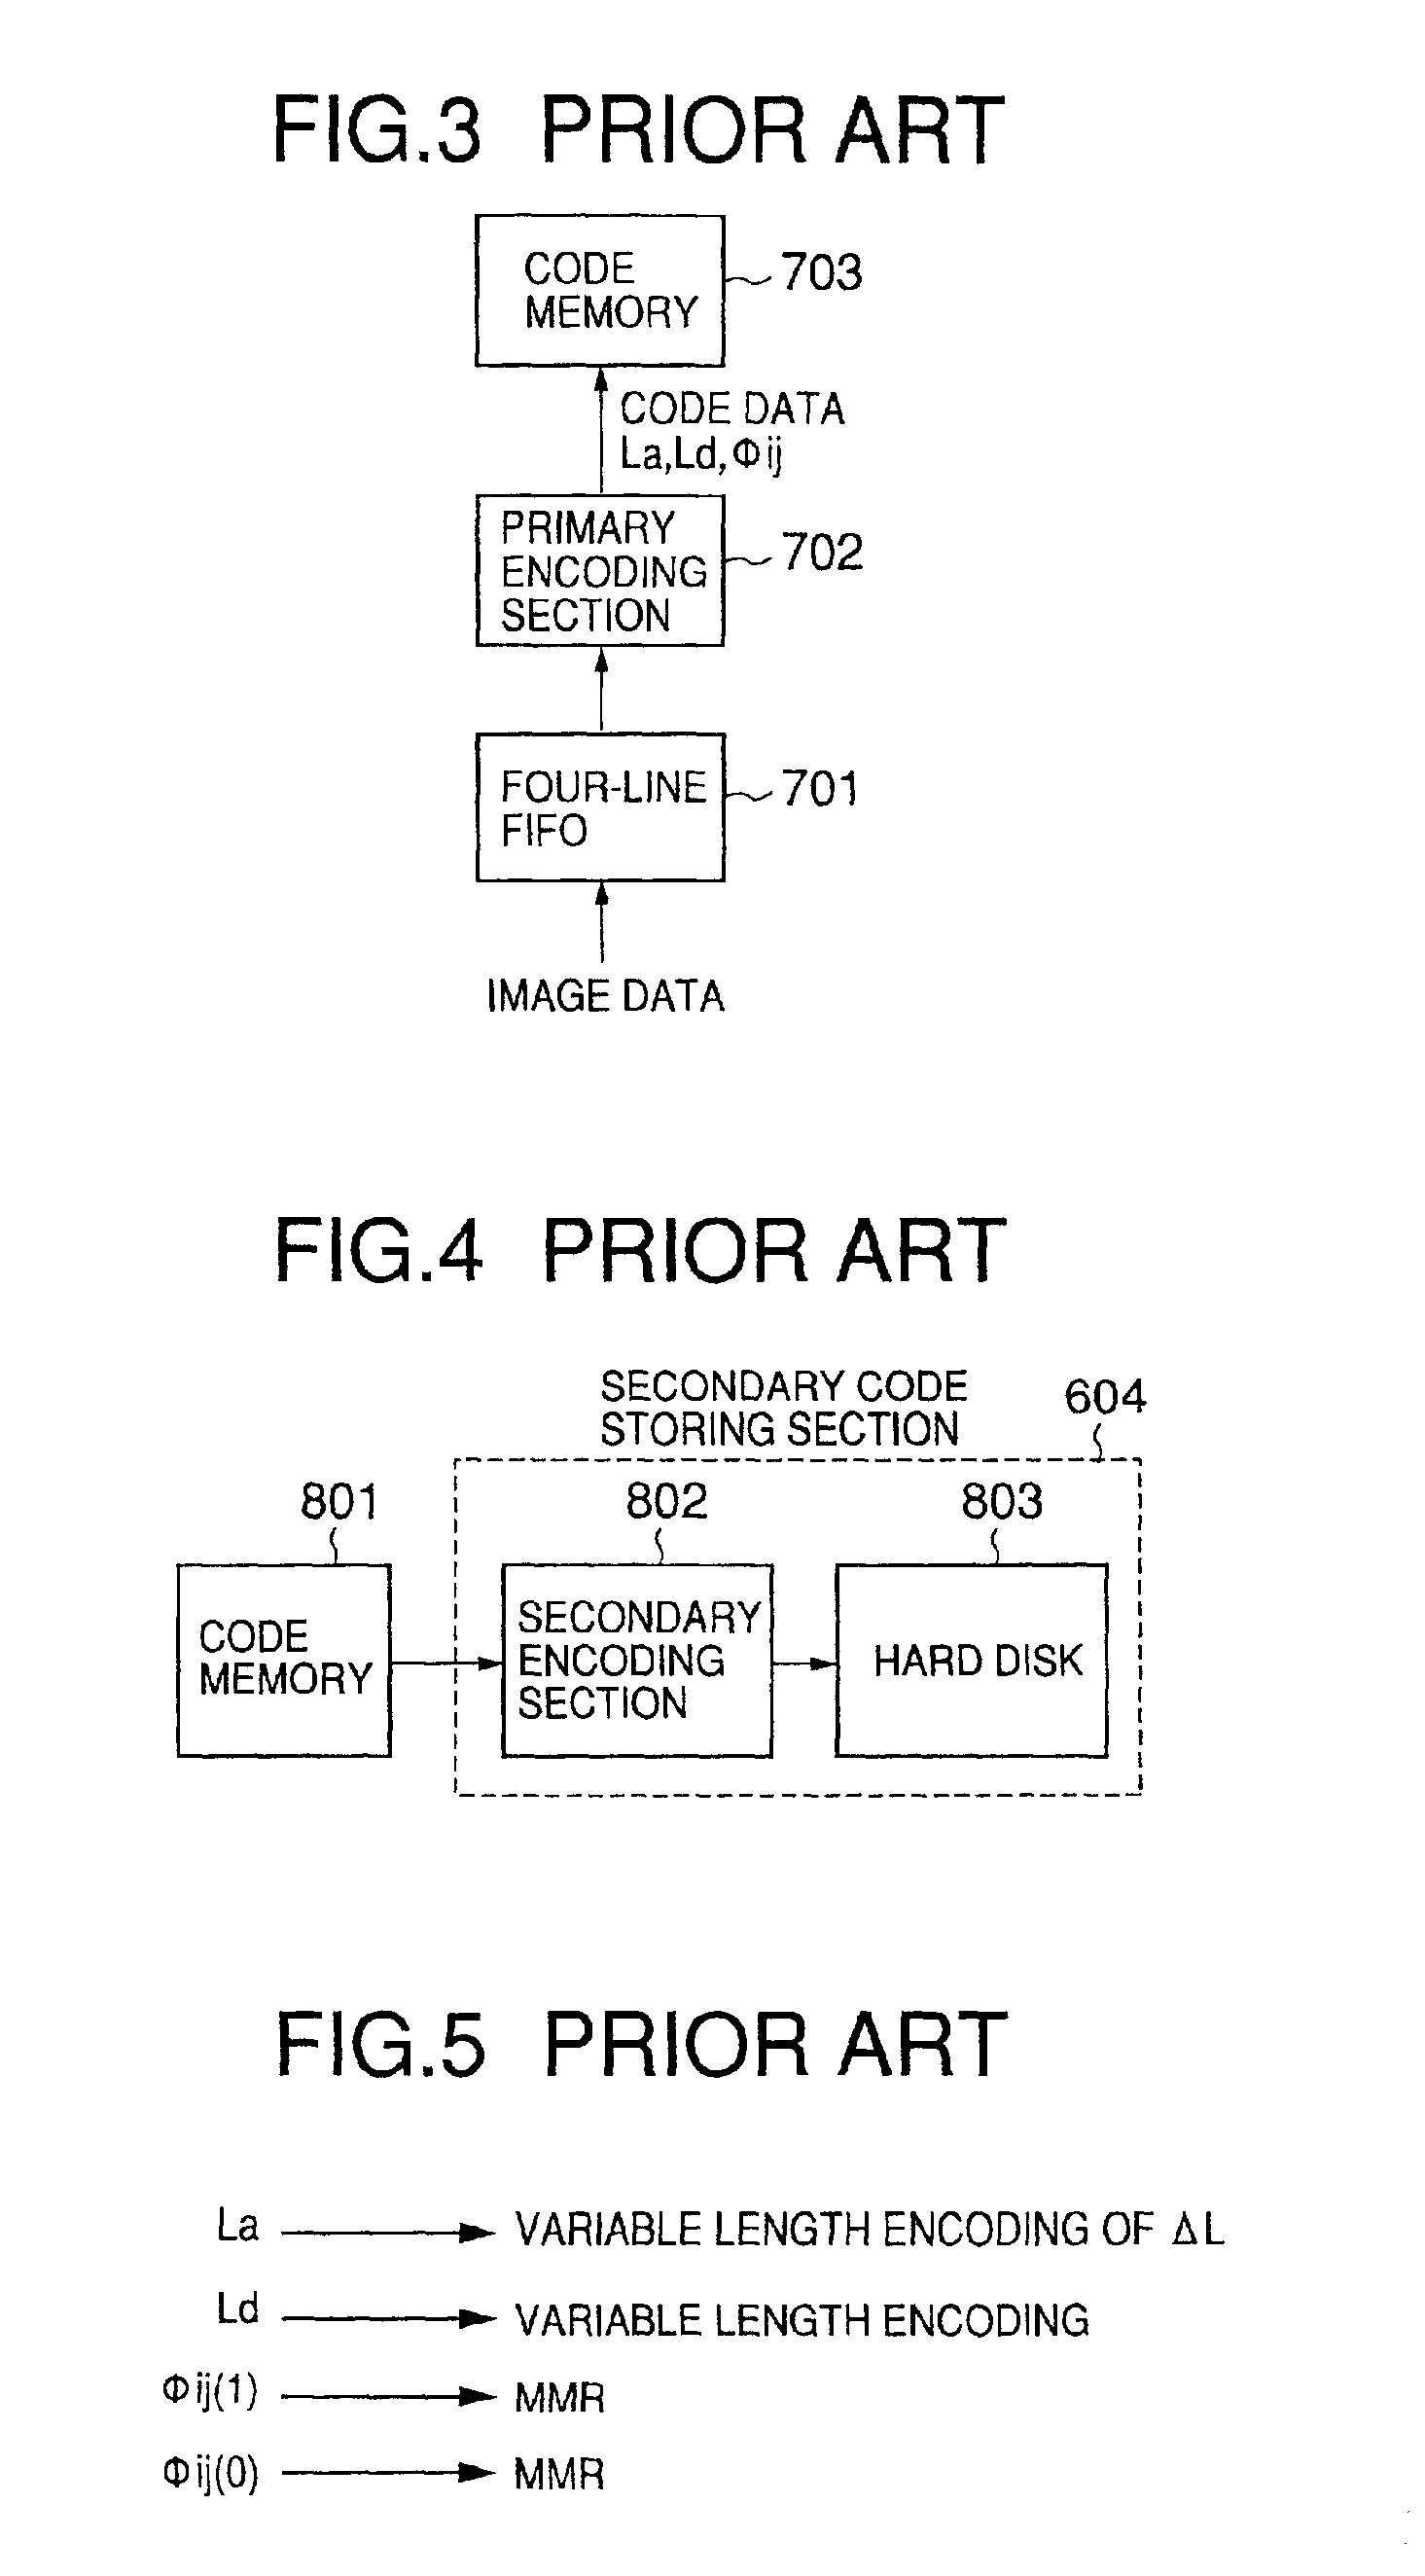 Image data compression apparatus for compressing both binary image data and multiple value image data